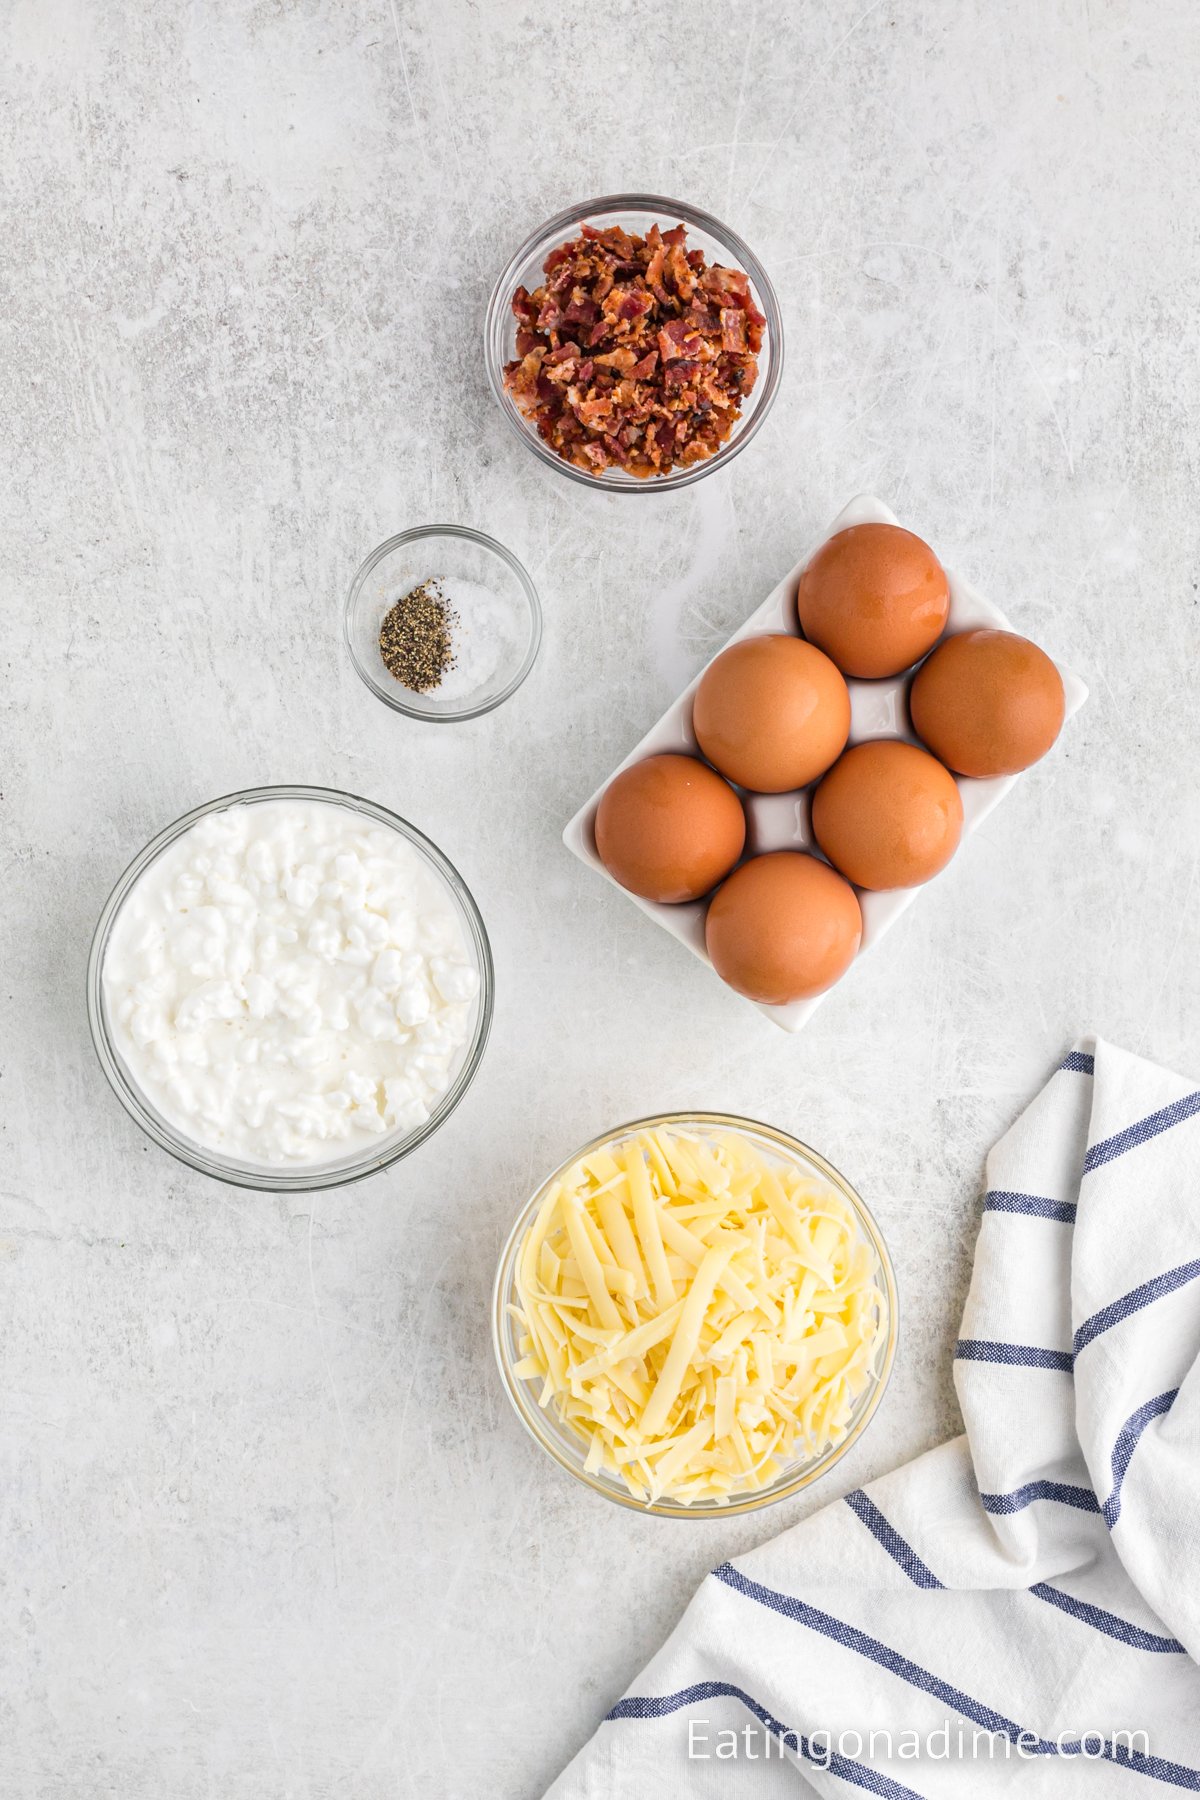 the ingredients needed large eggs, bacon, cottage cheese, shredded gruyere cheese, salt and pepper